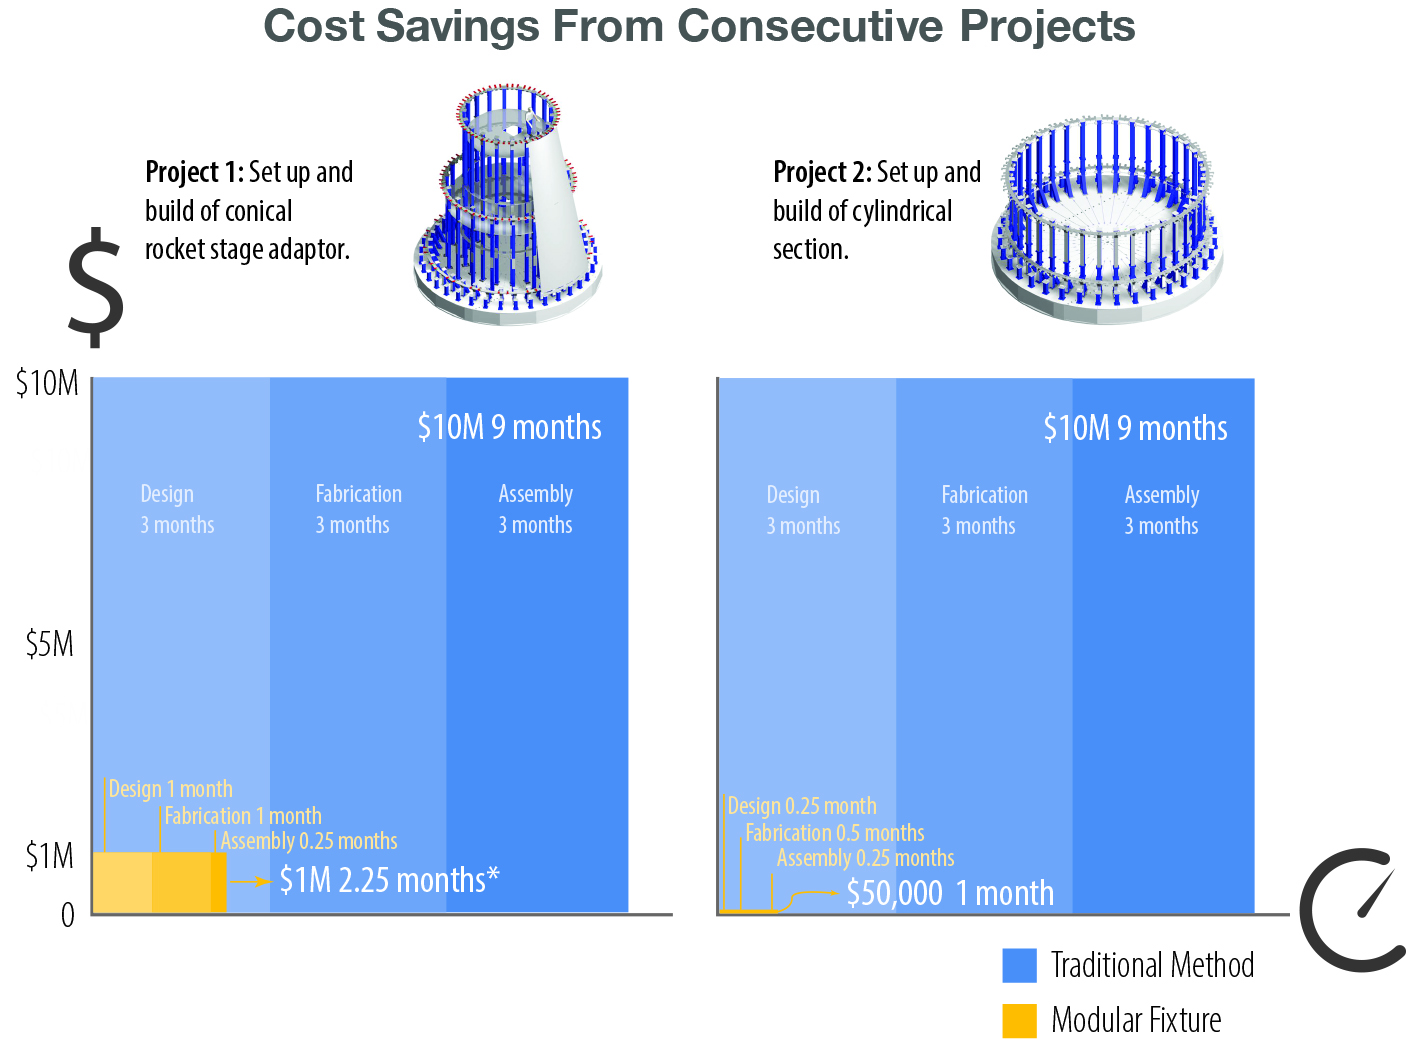 This graphic illustrates how NASA's development of modular fixtures significantly reduced its costs for designing, fabricating, and assembling welding tooling. *Project 1's cost of $1 million when using the modular fixture method includes the cost for the initial development of the modular fixture platform. Reuse of the modular fixtures results in future cost savings in subsequent projects.